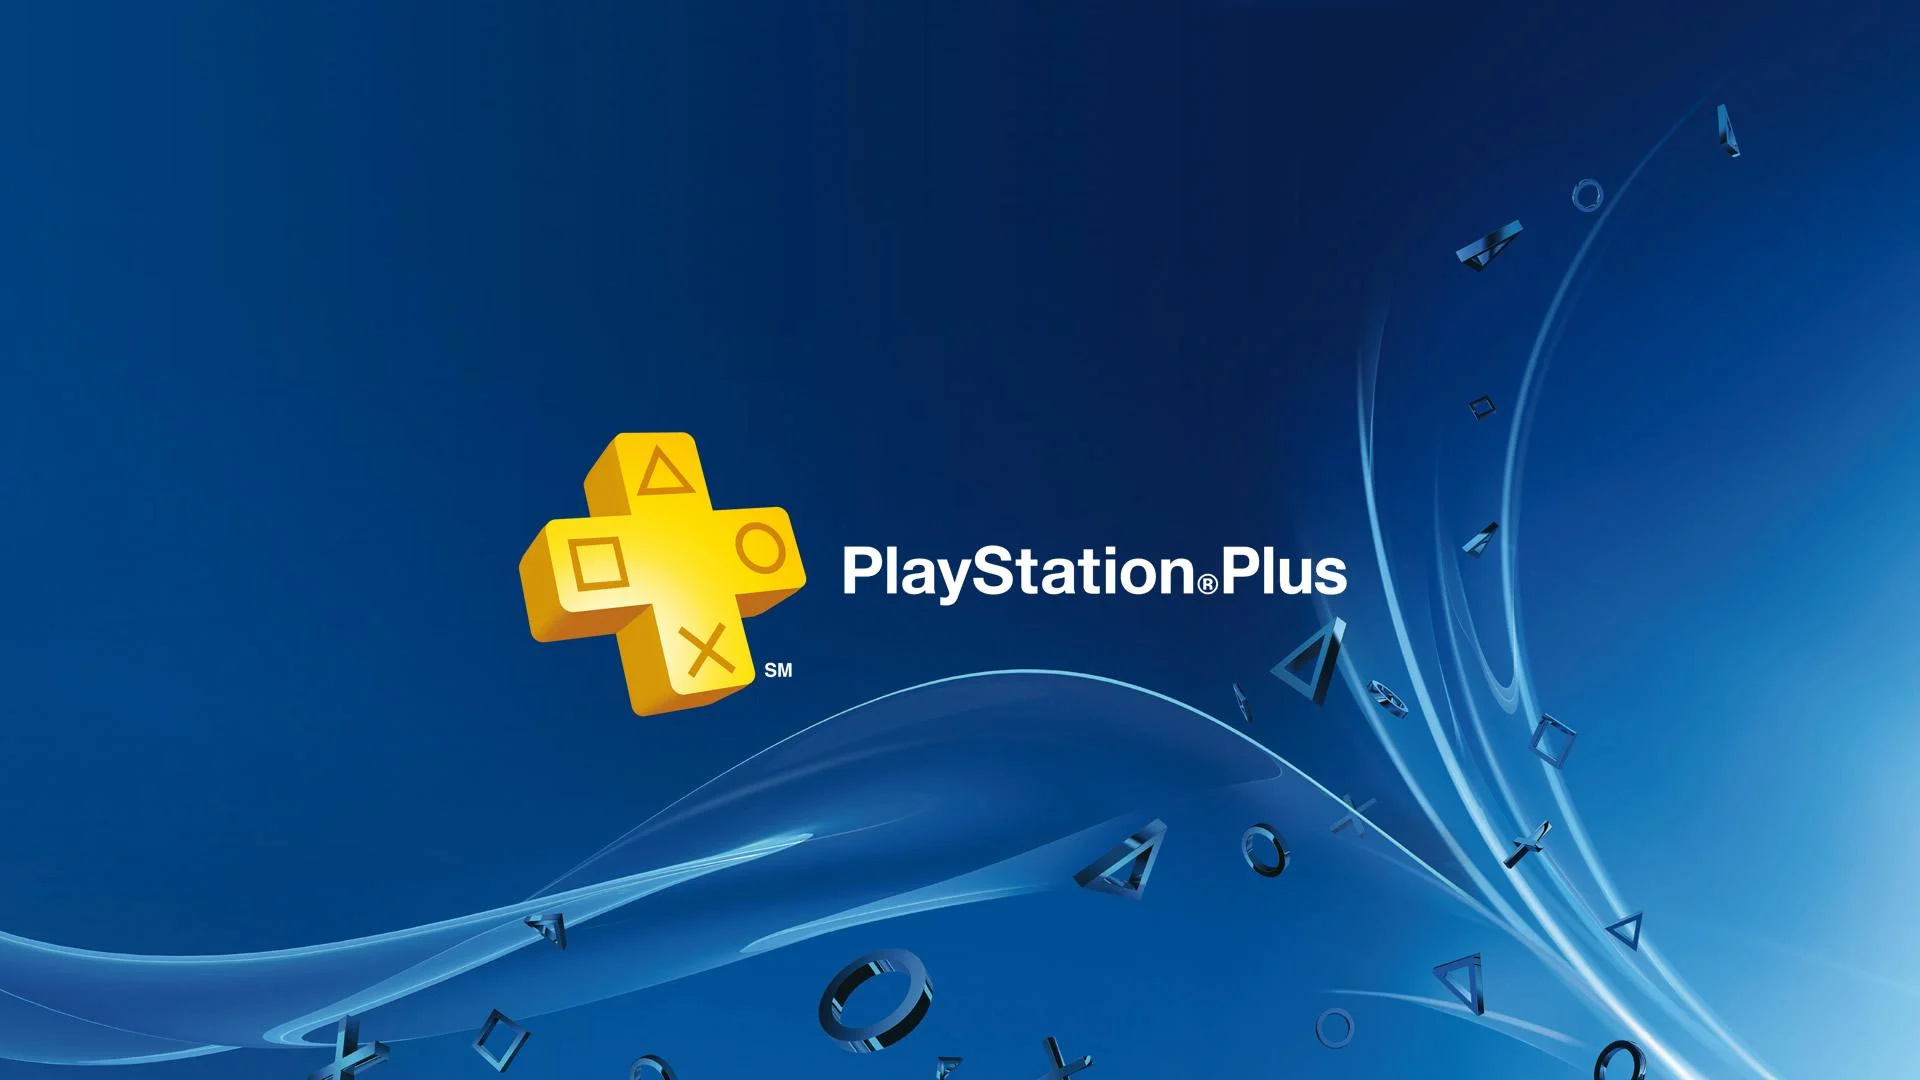 ps4 games on ps now